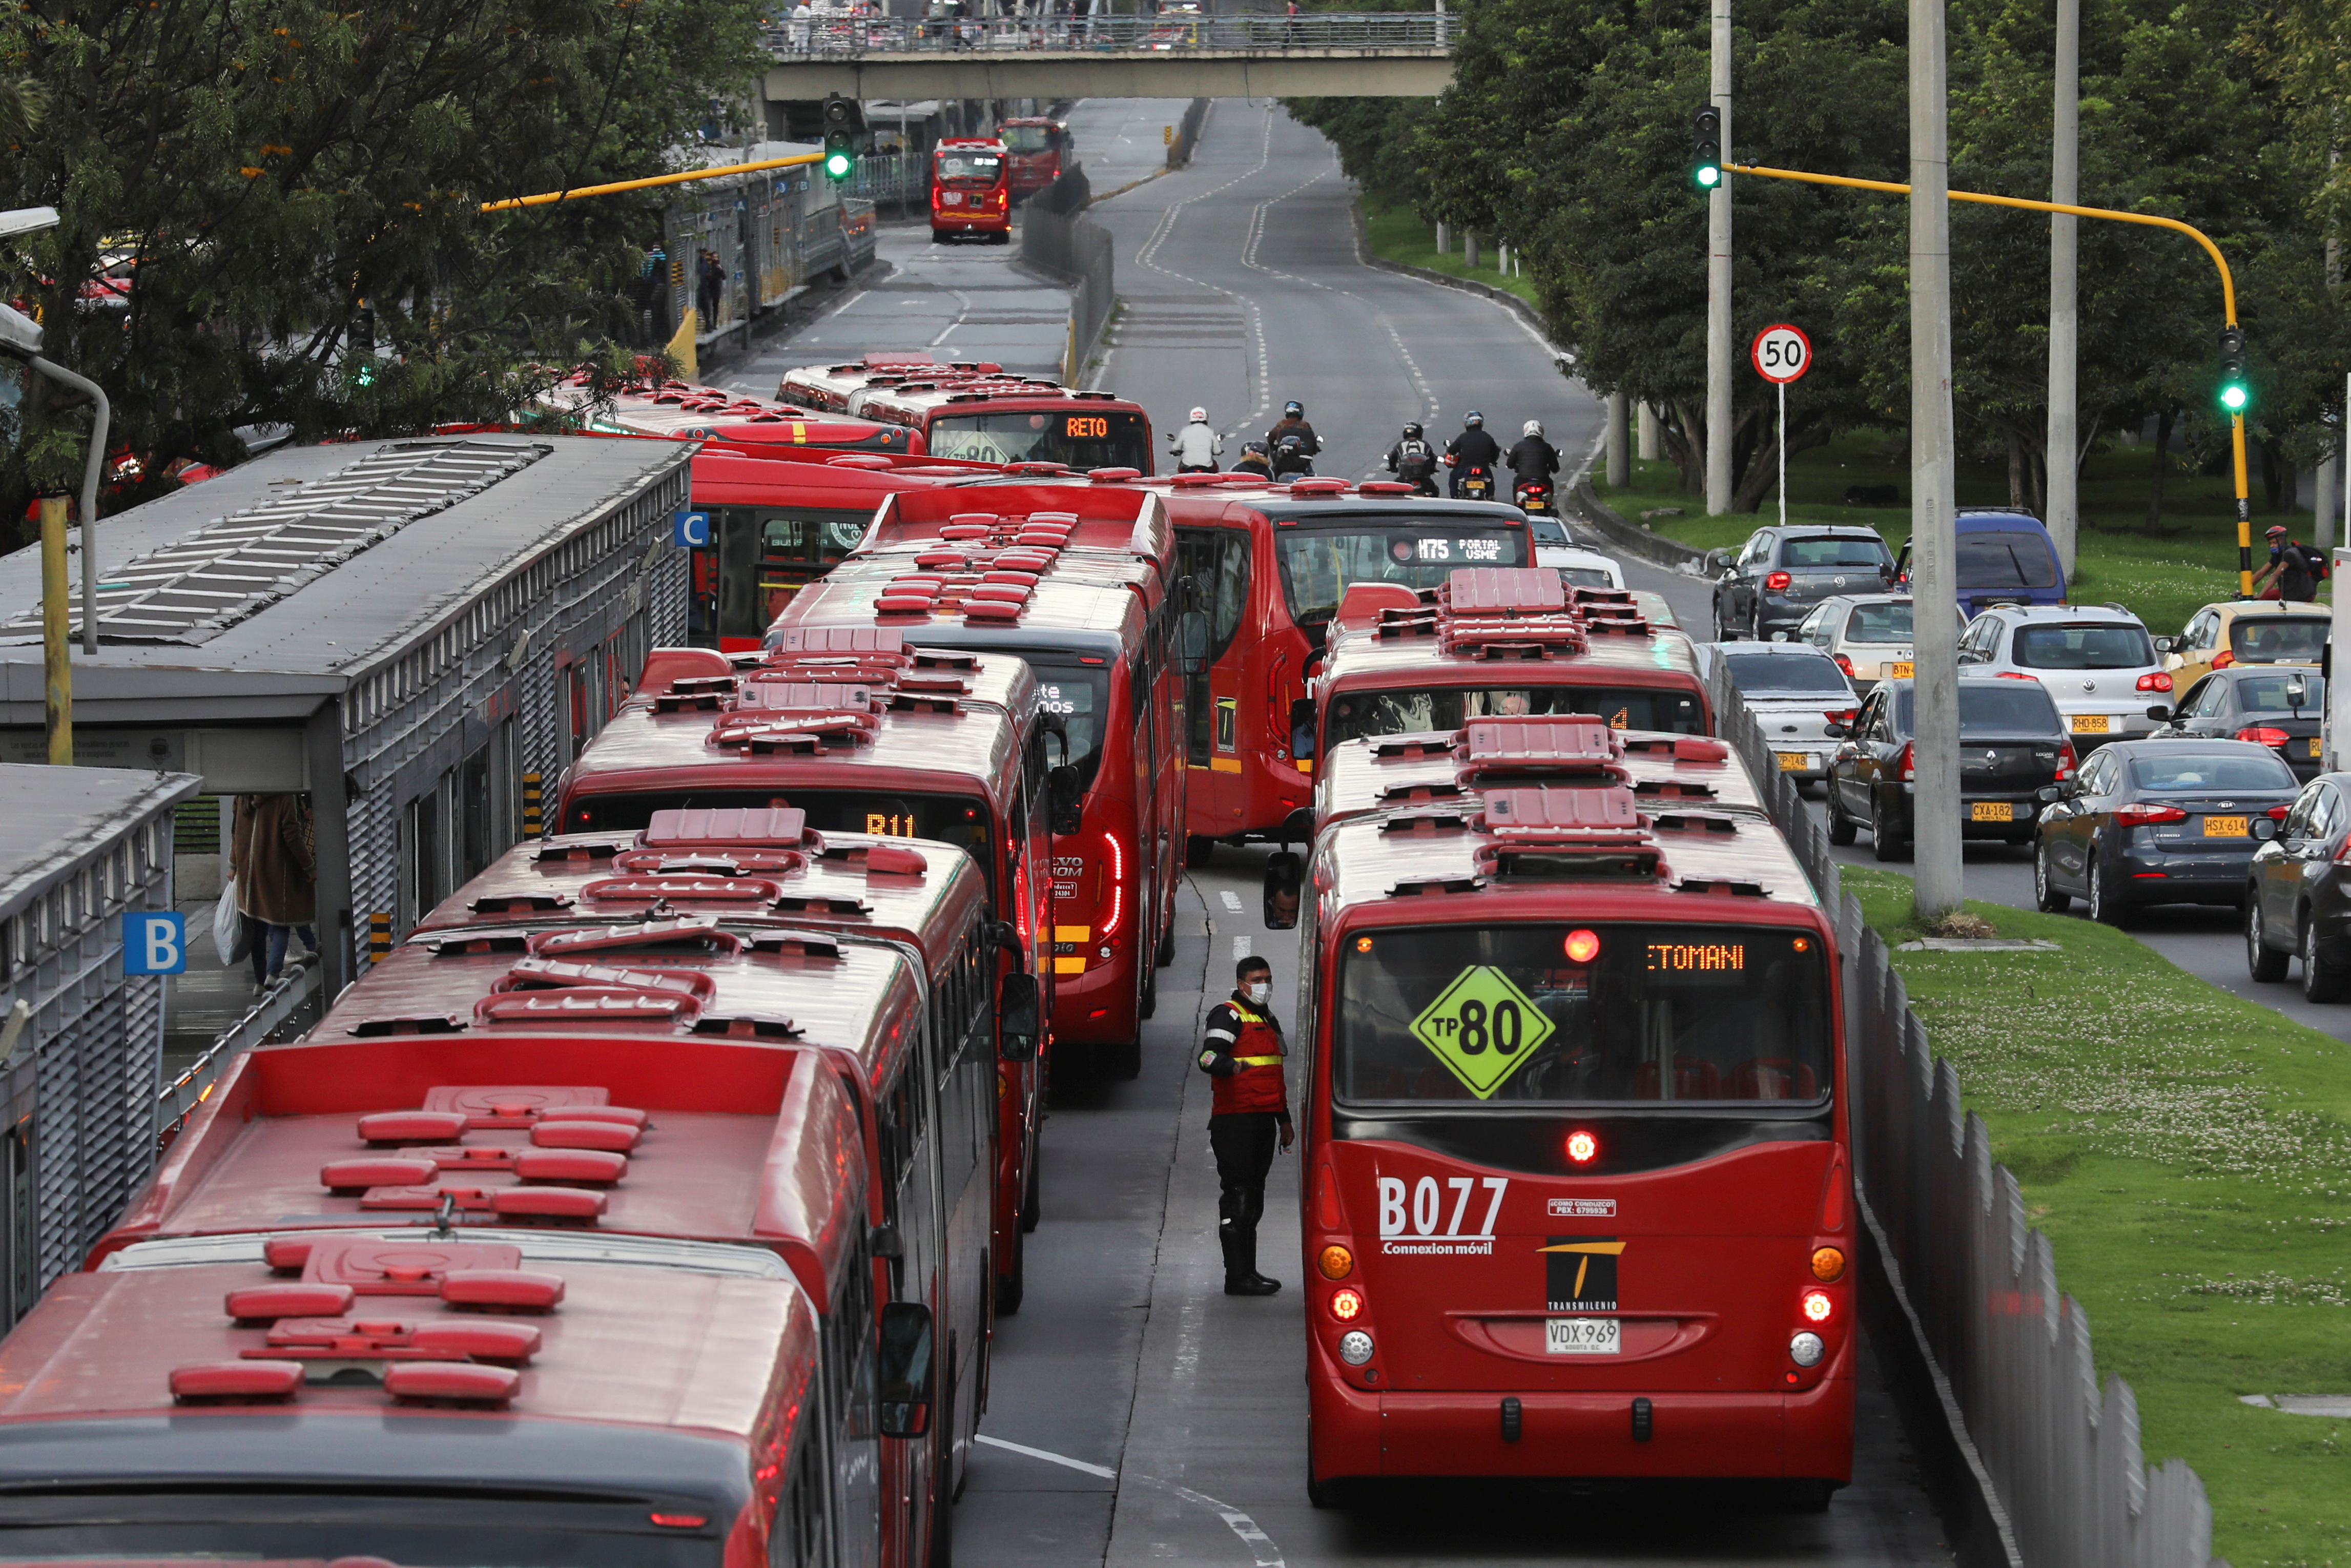 TransMilenio thefts increased by more than 50% in the first half of 2022. File photo.  Photo: REUTERS/Luisa Gonzalez